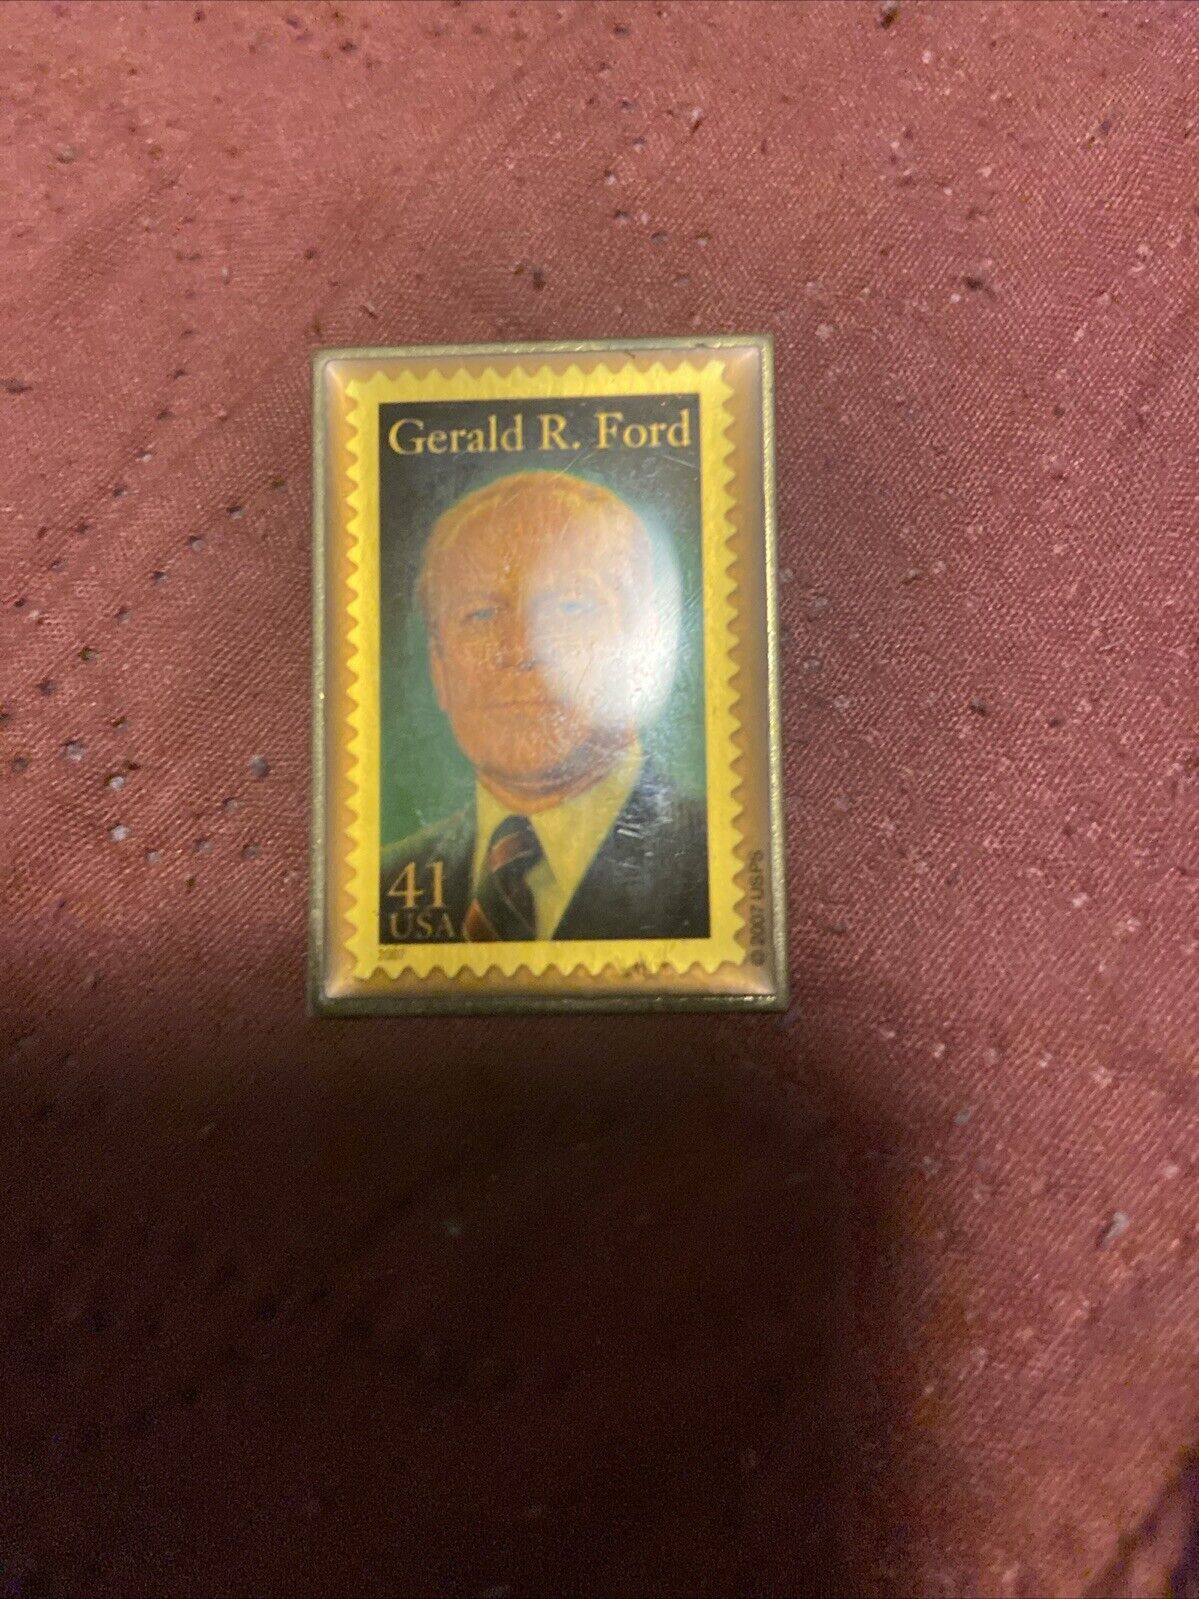 Gerald Ford 41st President Pin Made in the USA